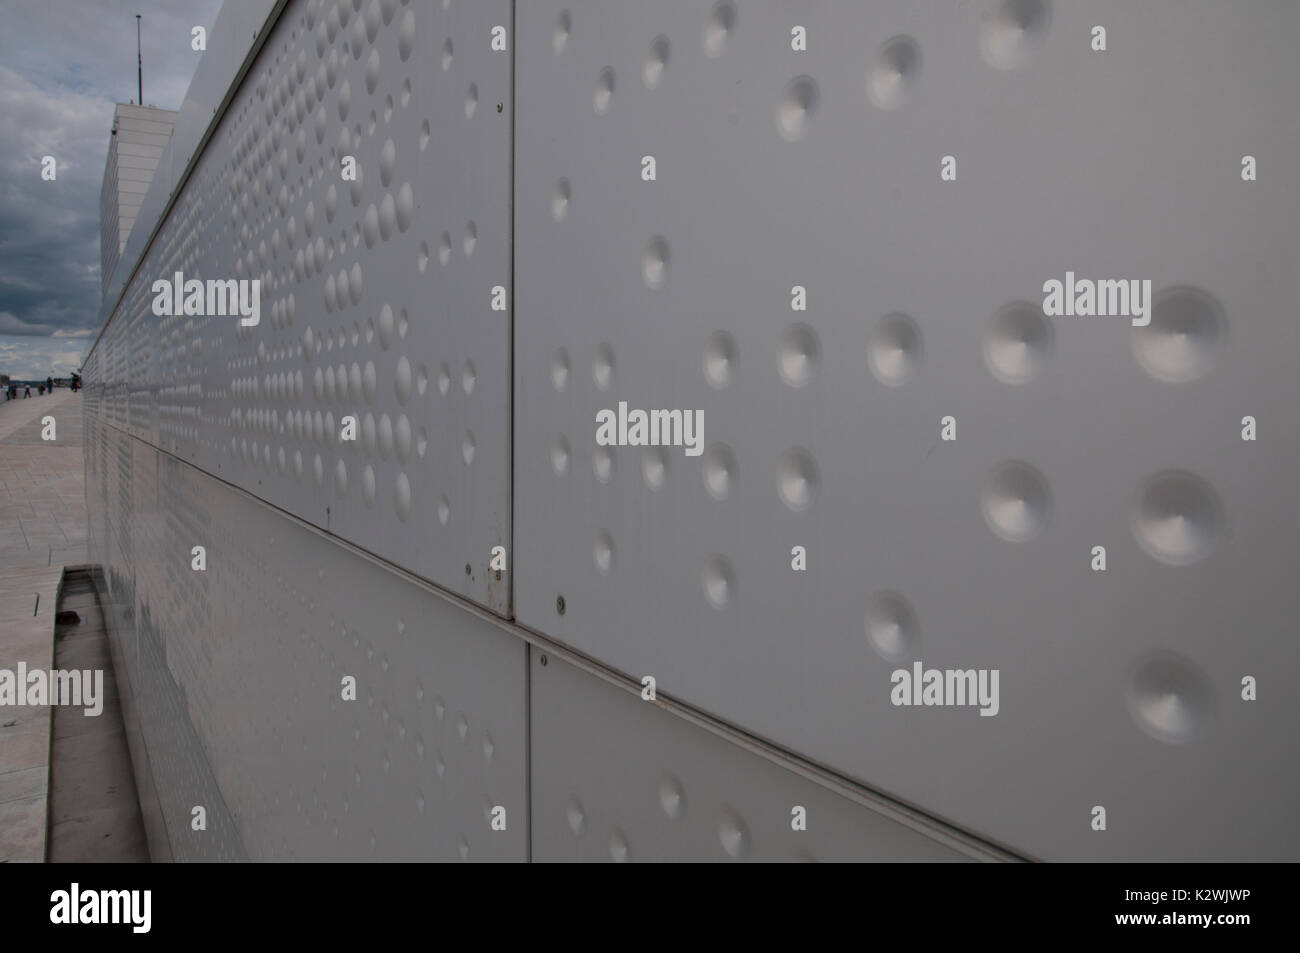 Embossed and indented aluminium panels by RMIG repeated over the facade on the Oslo Opera House. Opened 2008, design by architects Snøhetta. Stock Photo